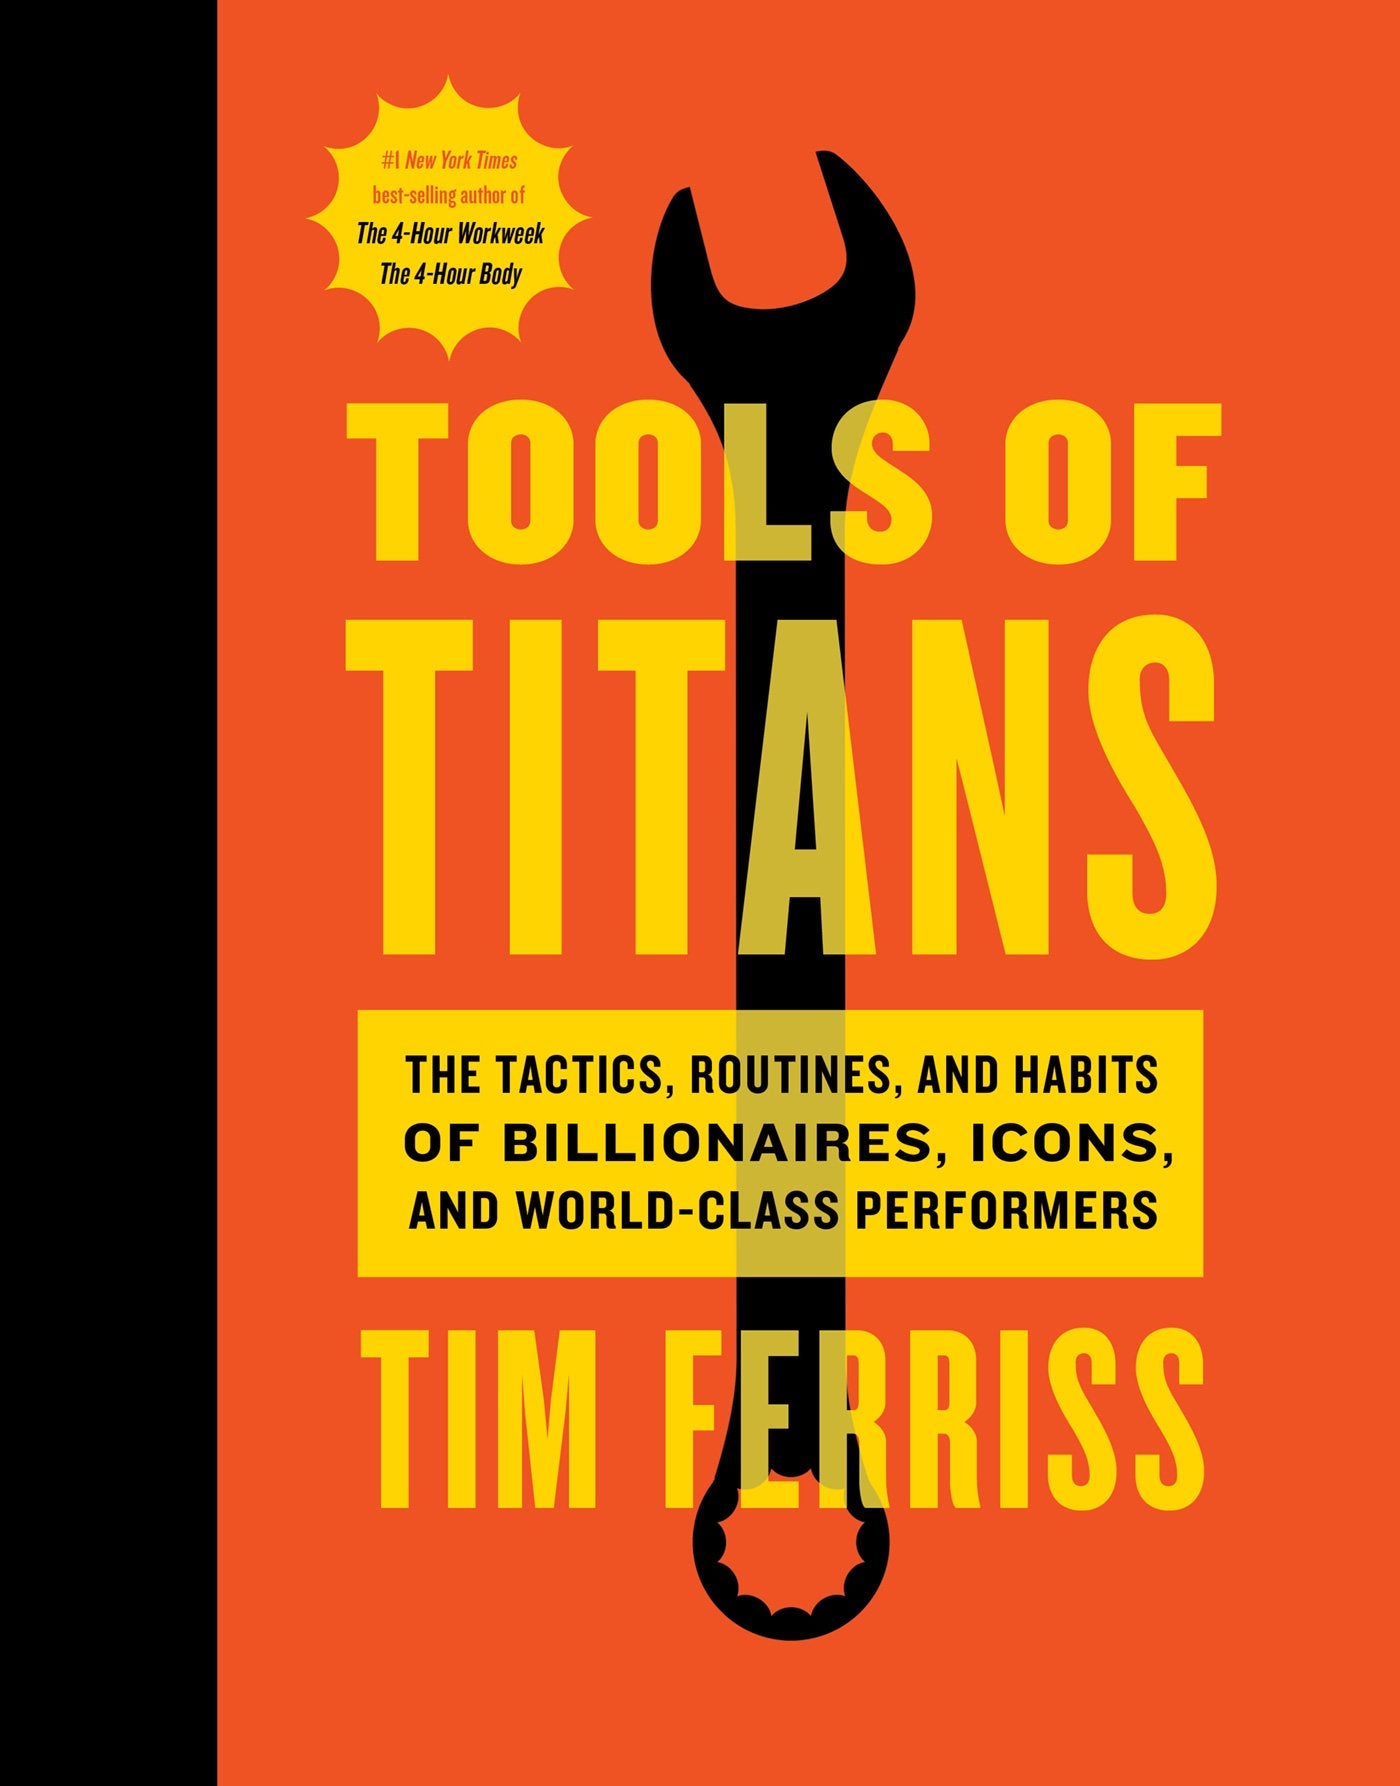 Tools of Titans: The Tactics, Routines, and Habits of Billionaires, Icons, and World-Class Performers - Booksondemand